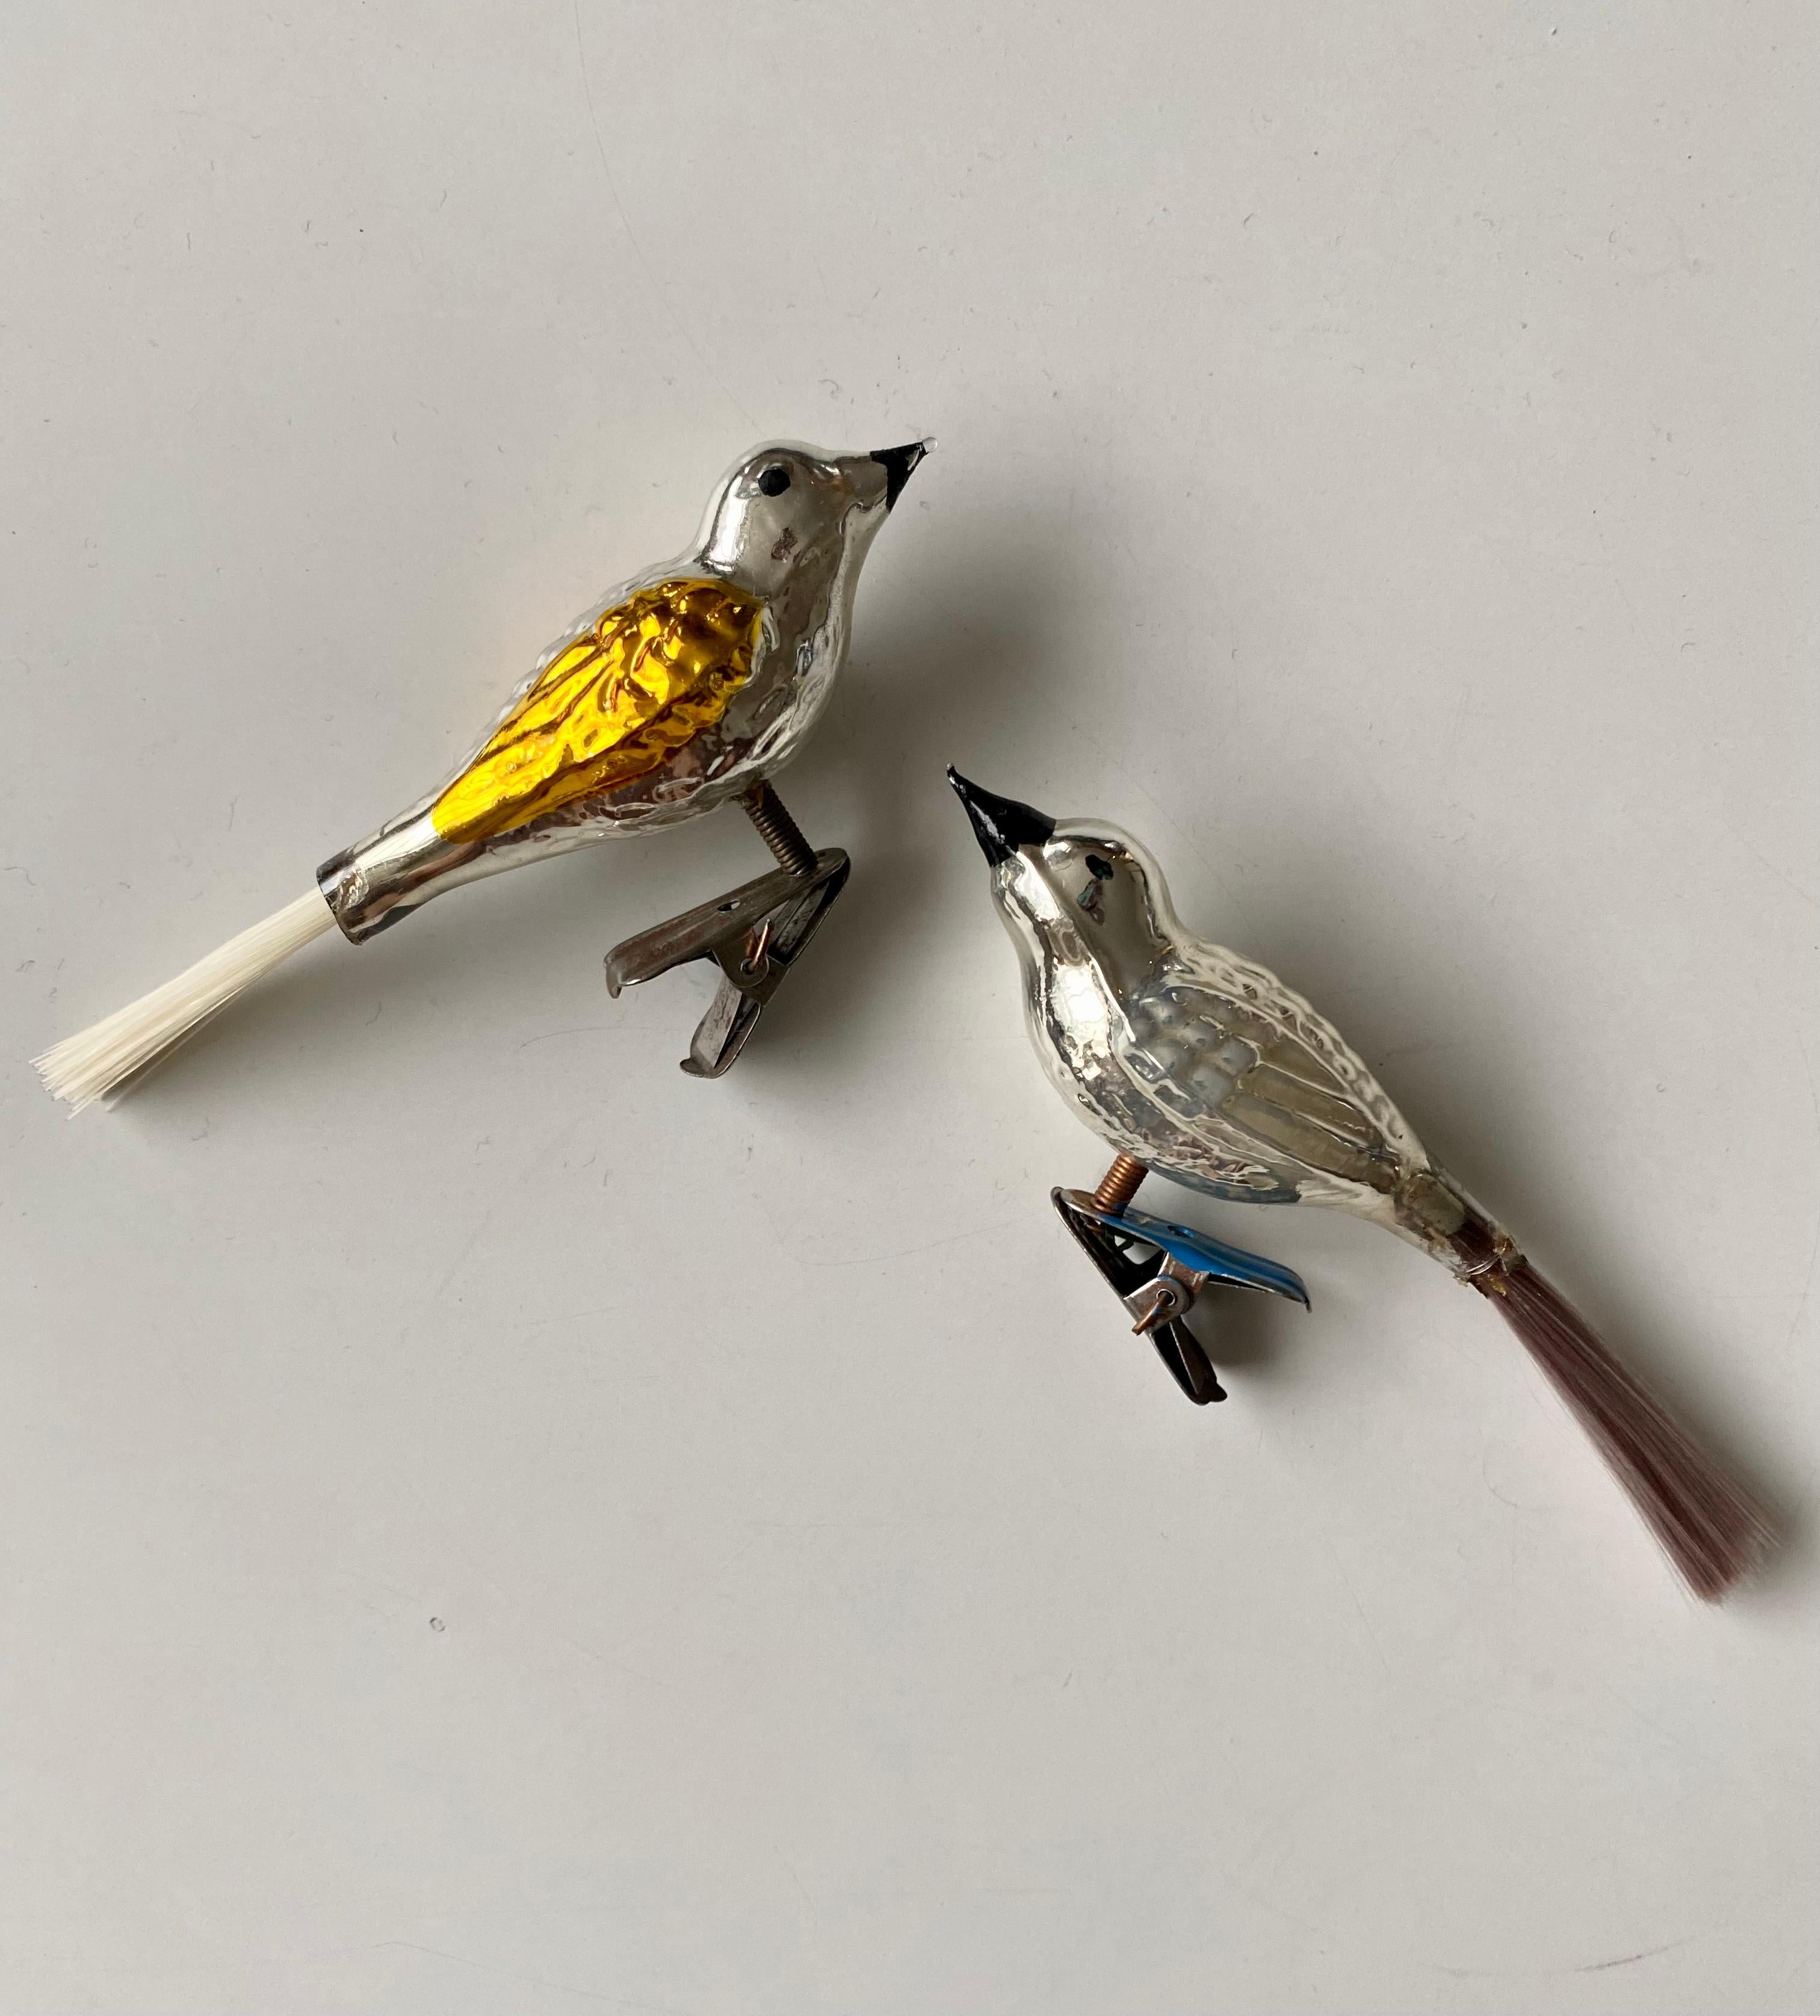 Set of two, most likely, Mercury glass clip-on Christmas birds with long tails. Beautifully decorated and in good condition with normal wear, consisting their age. European pieces.